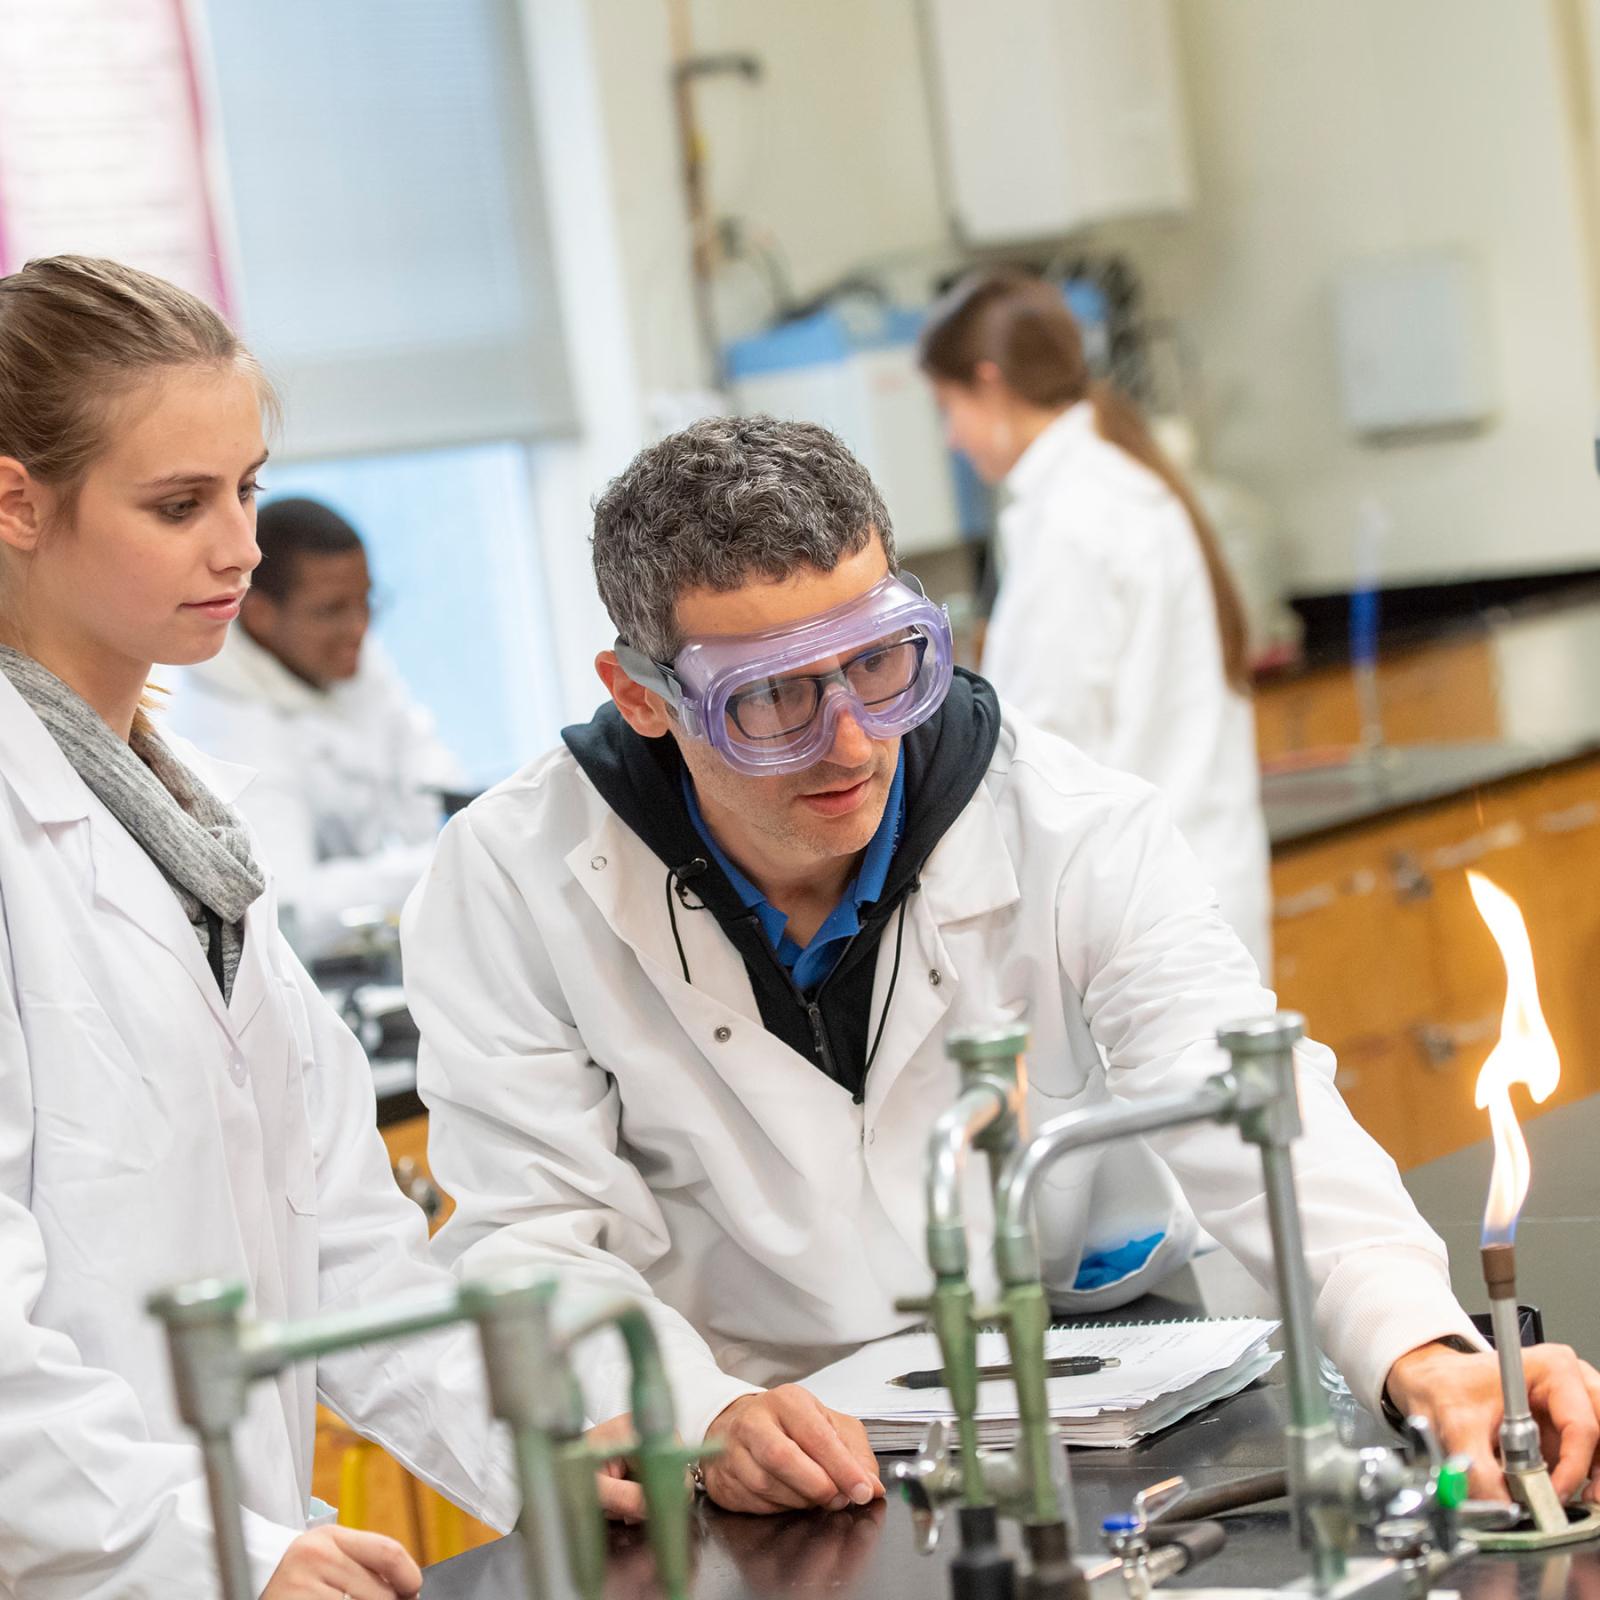 Pace University's Pleasantville Chemistry lab student working with professor using a bunsen burner